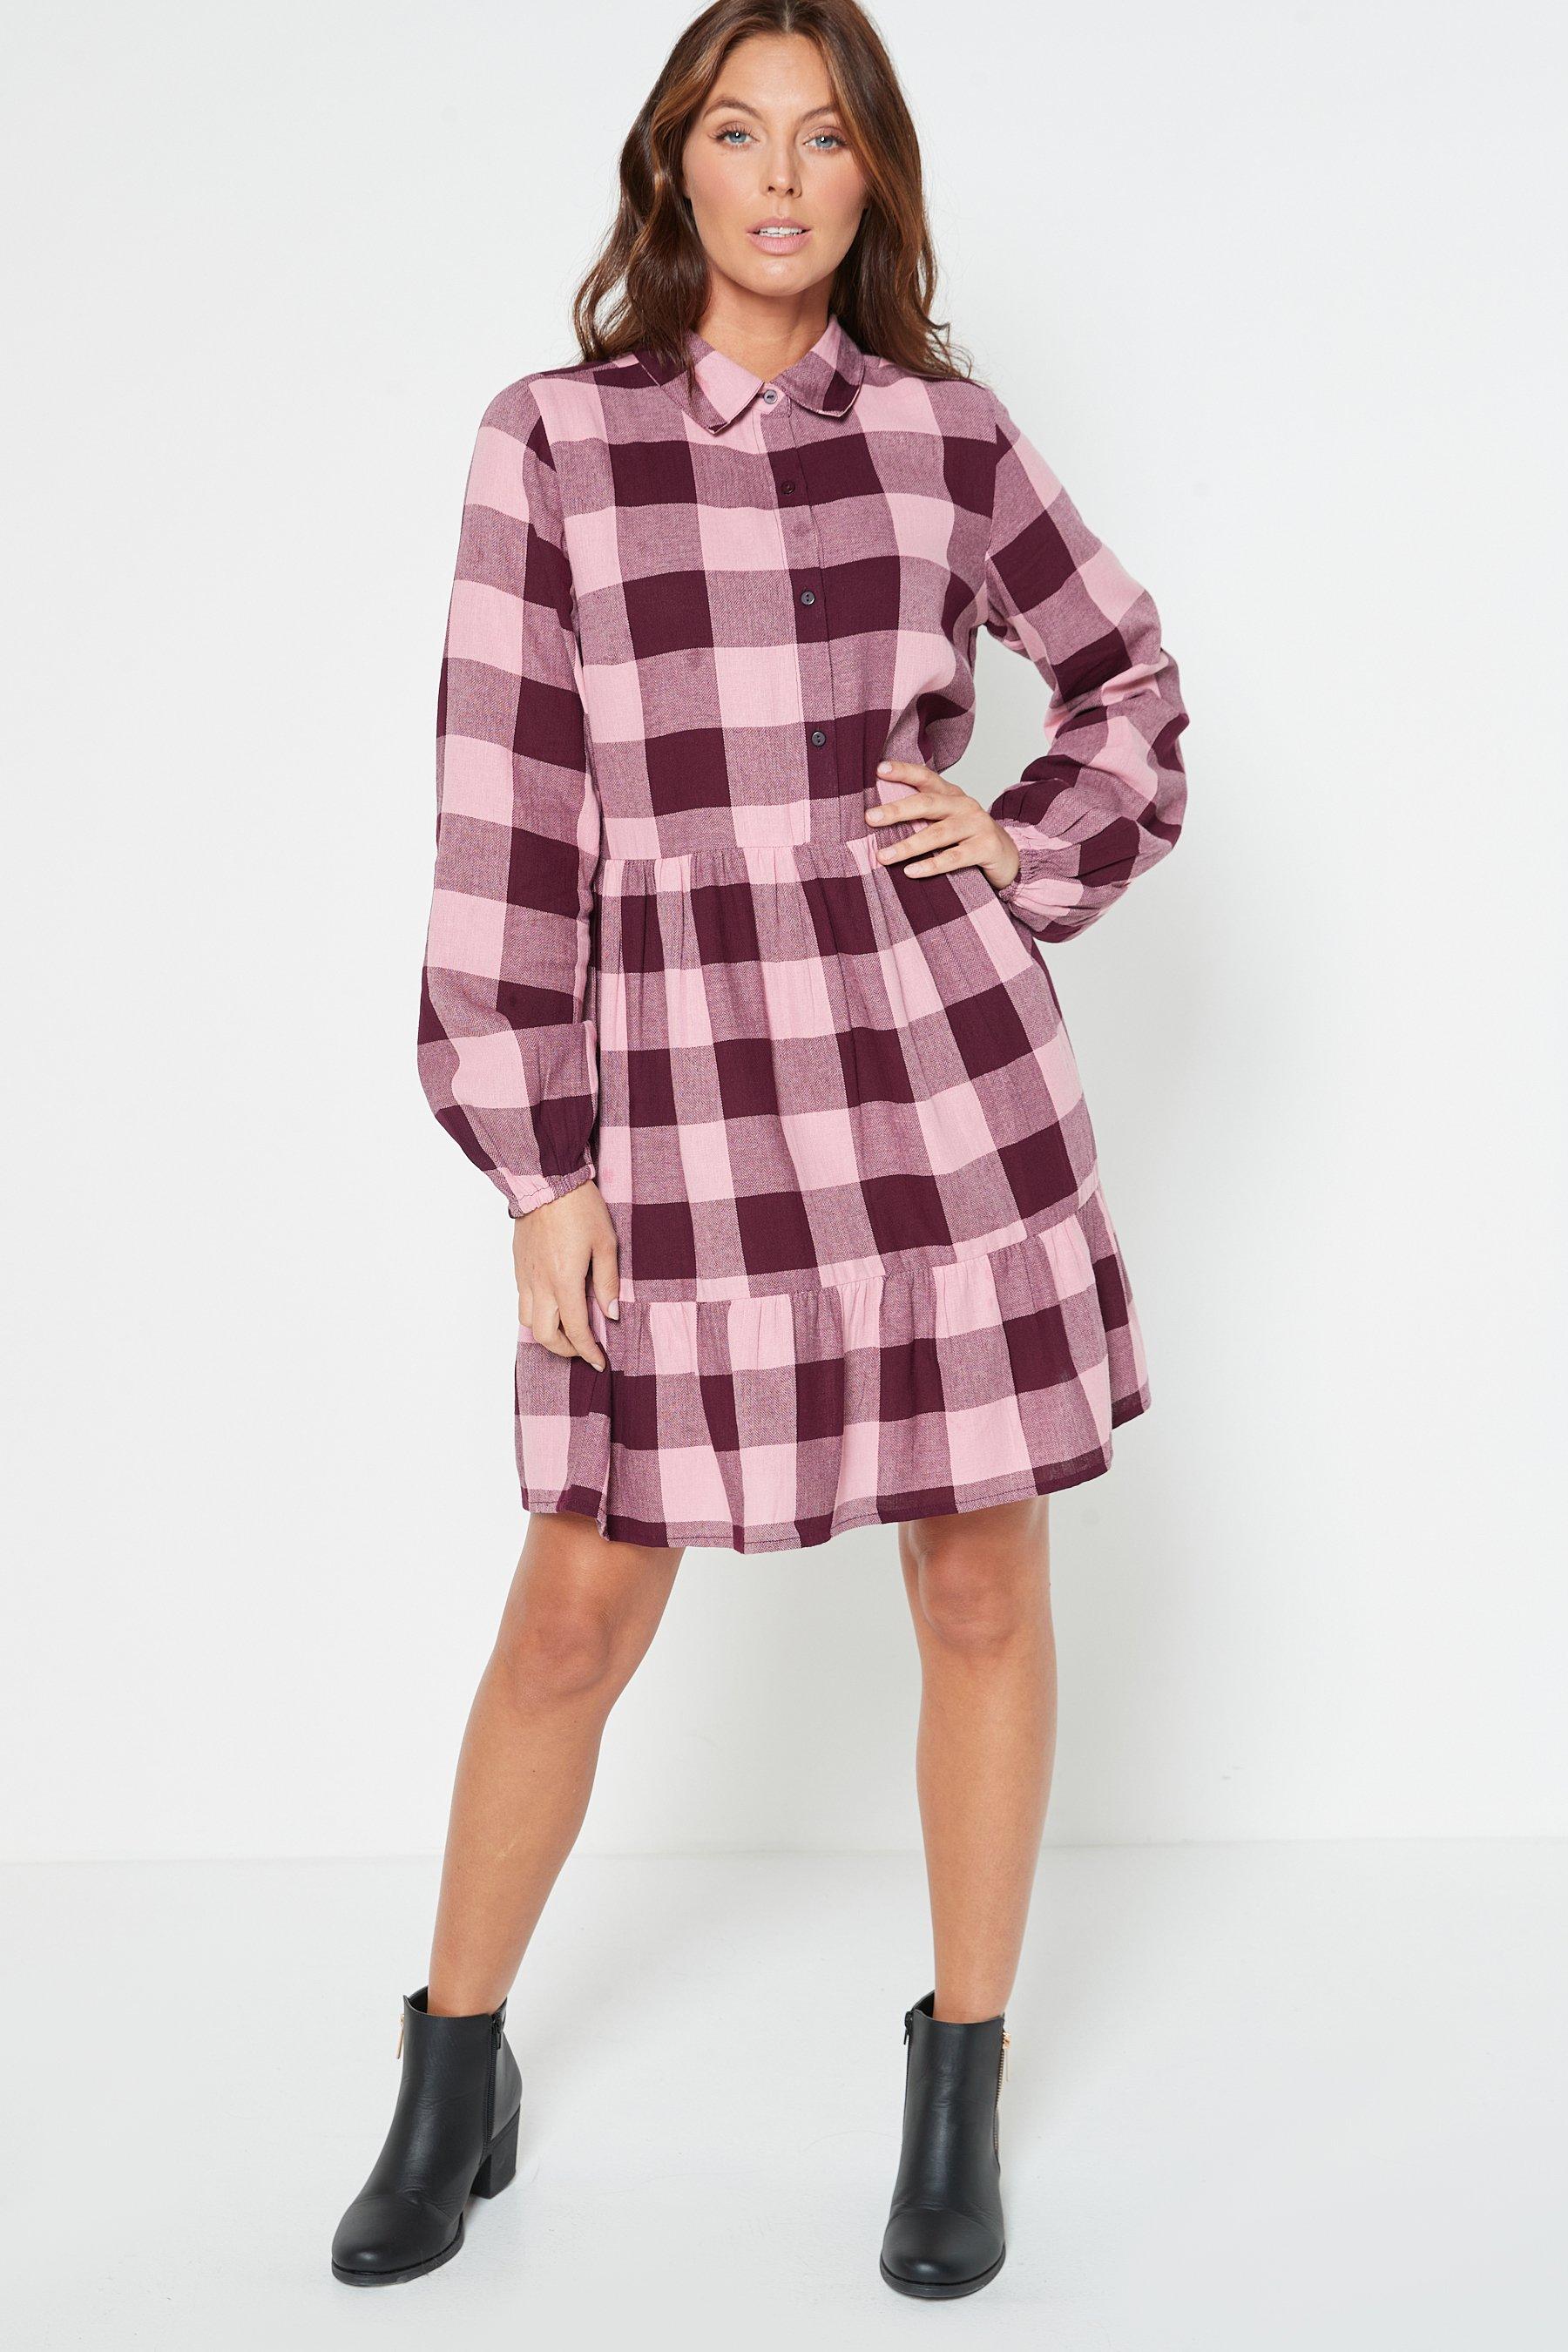 burgundy check half placket dress with frill hem - womens - red - size: 8